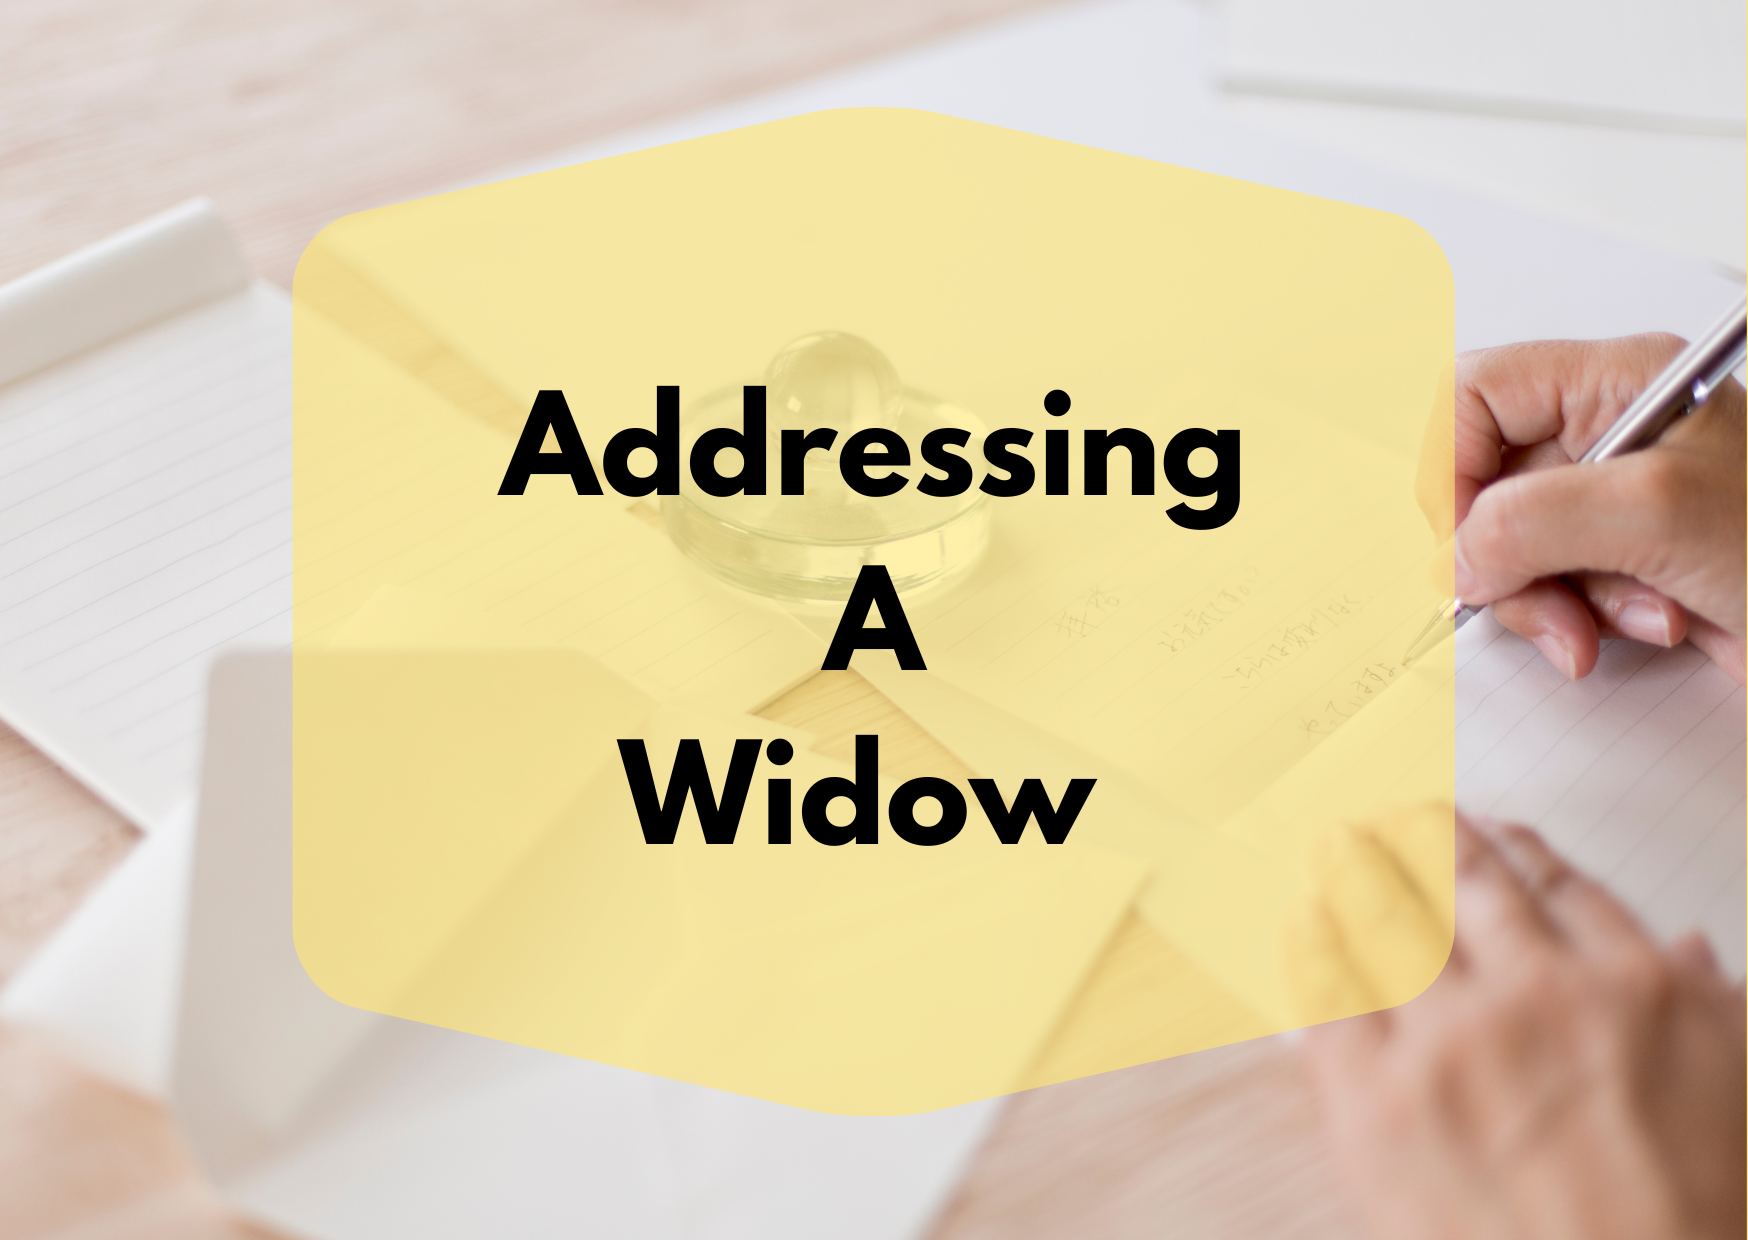 A picture of a person writing a letter with the caption "Addressing a Widow"